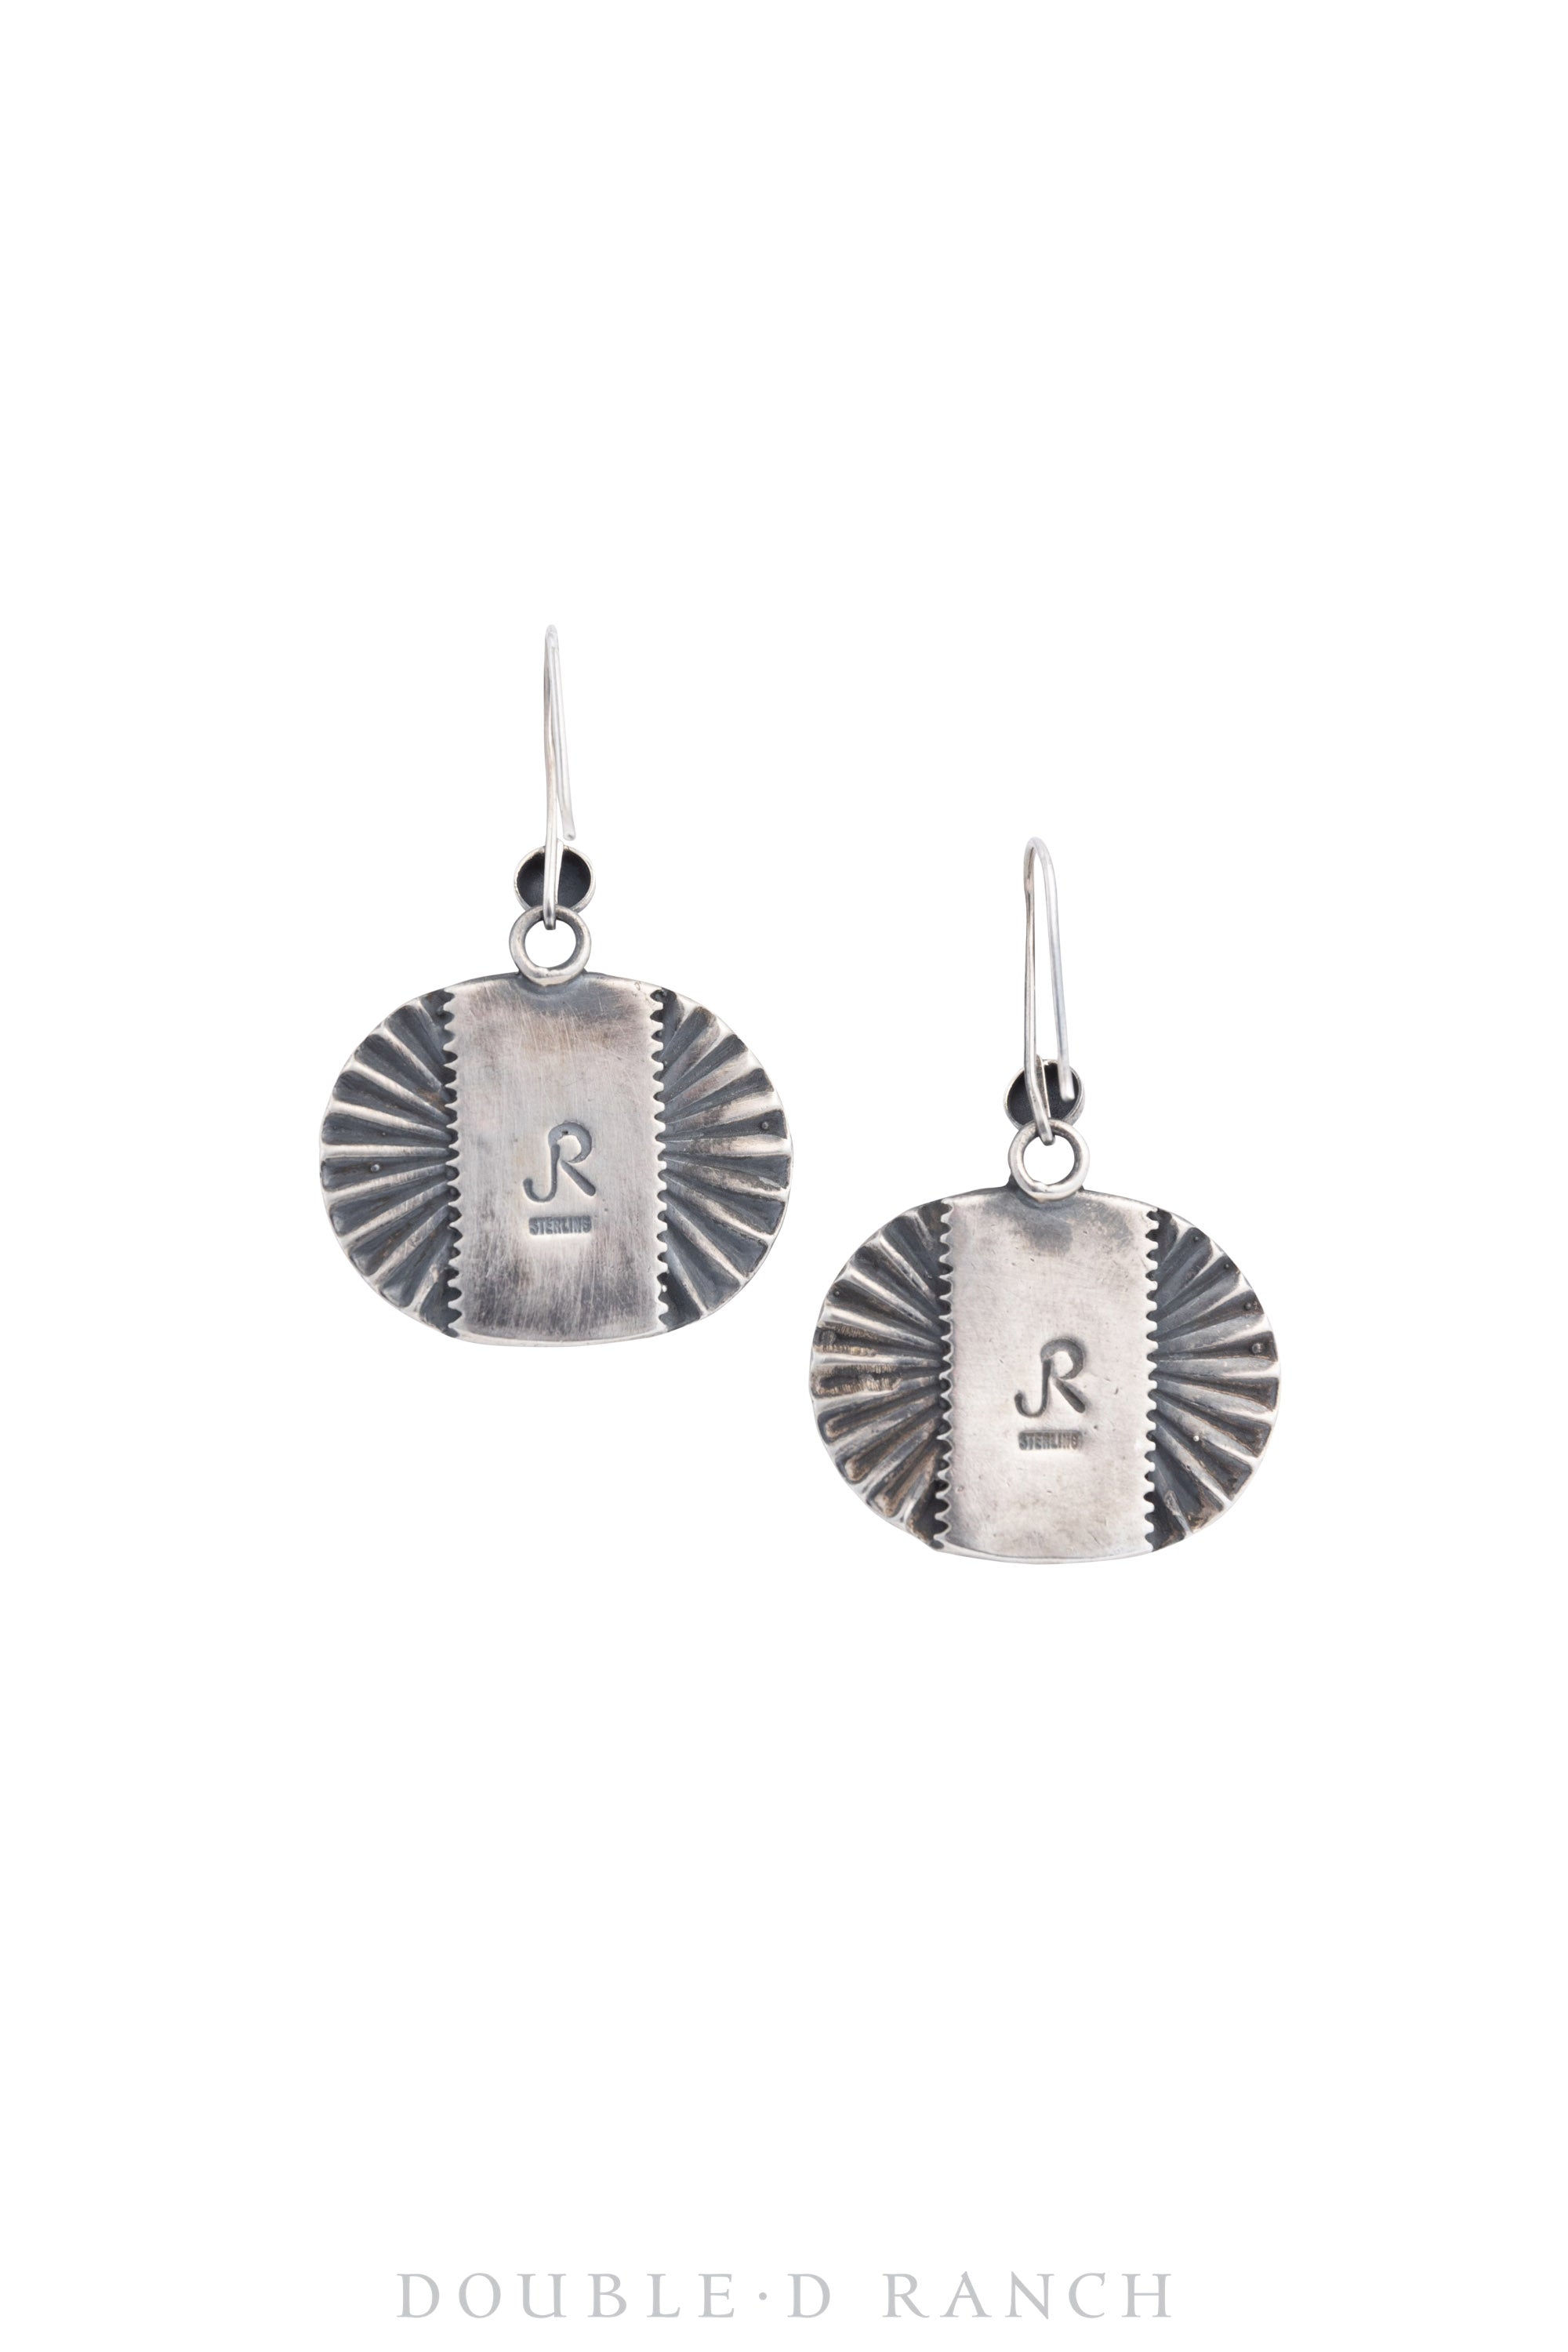 Earrings, Jesse Robbins, Turquoise & Orange Spiny Oyster, Morgan Silver Dollar Coin, Hallmark, Contemporary, 1560